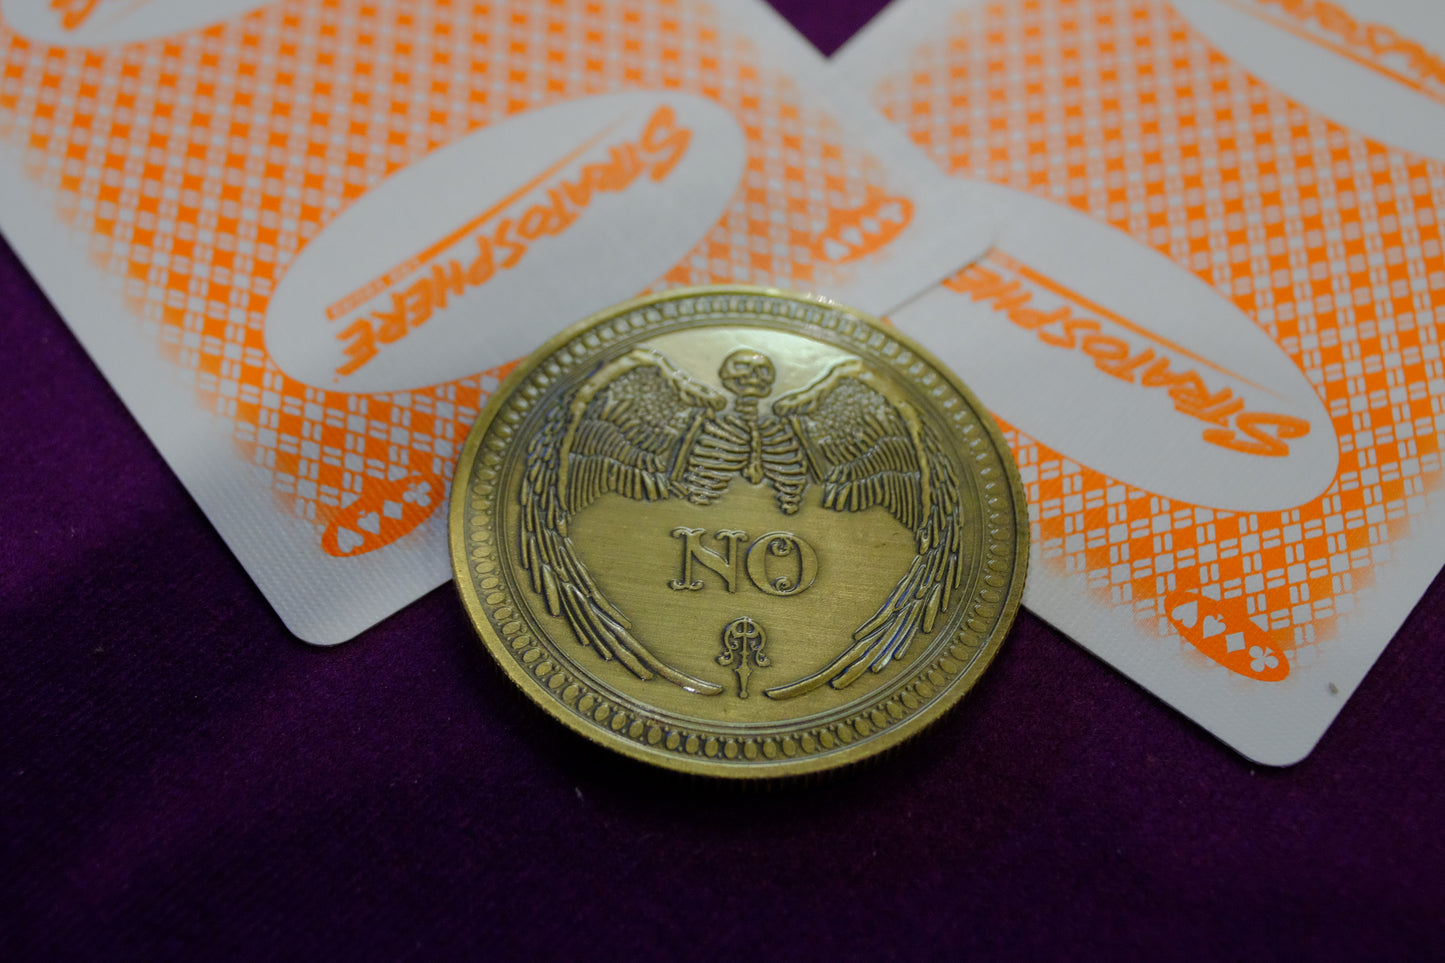 Yes No Ouija Coin